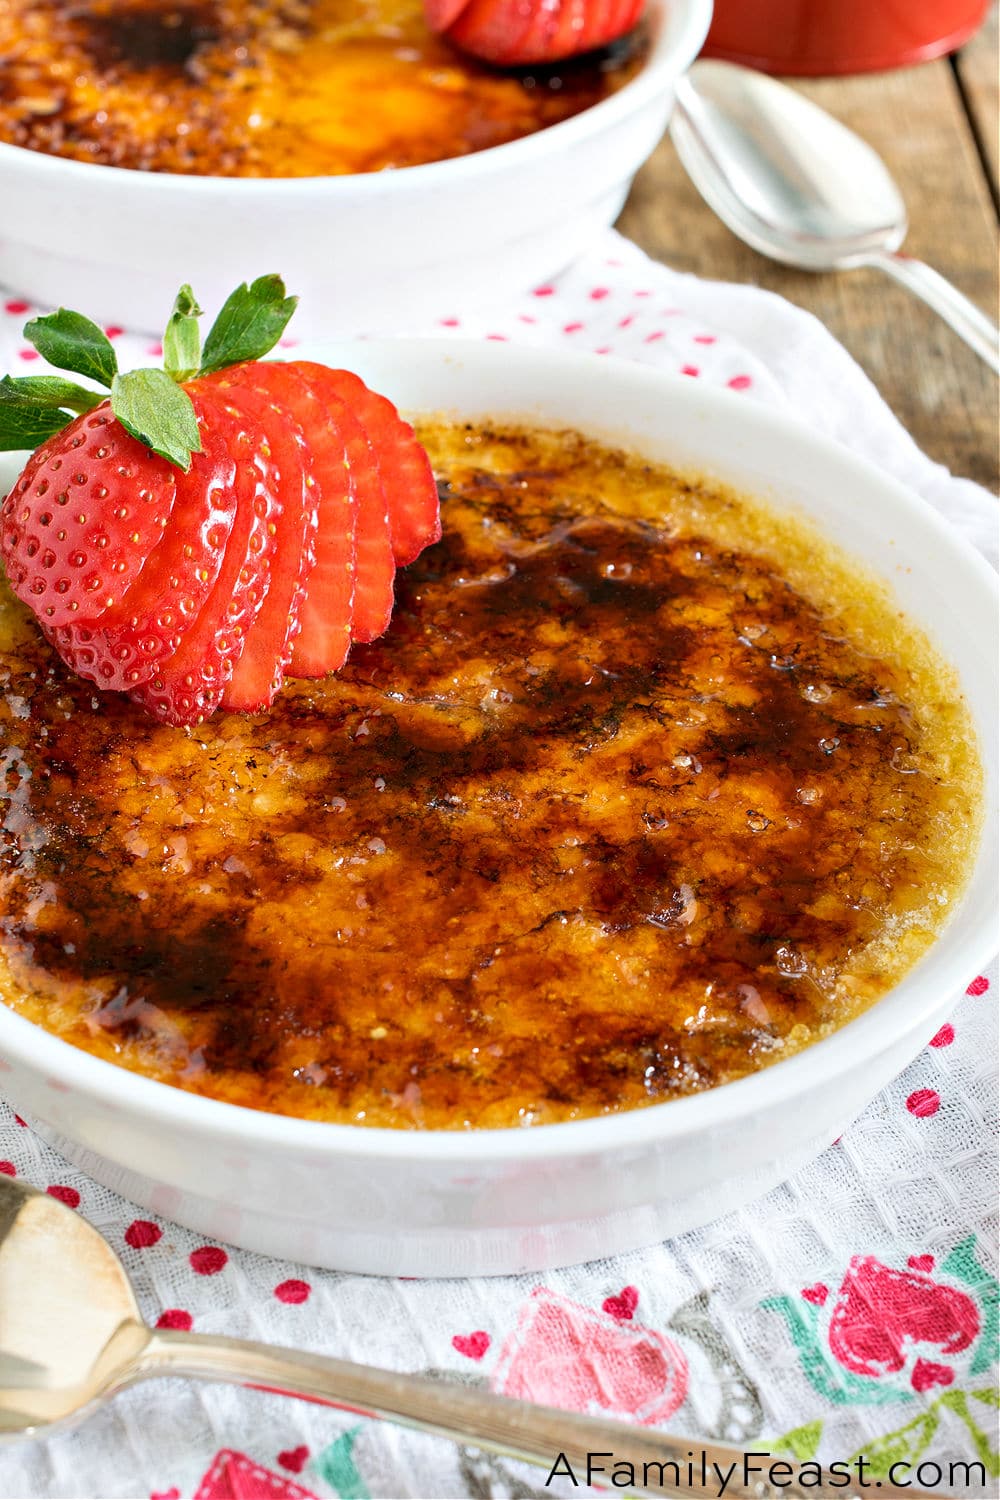 Creme Brulee - A Family Feast